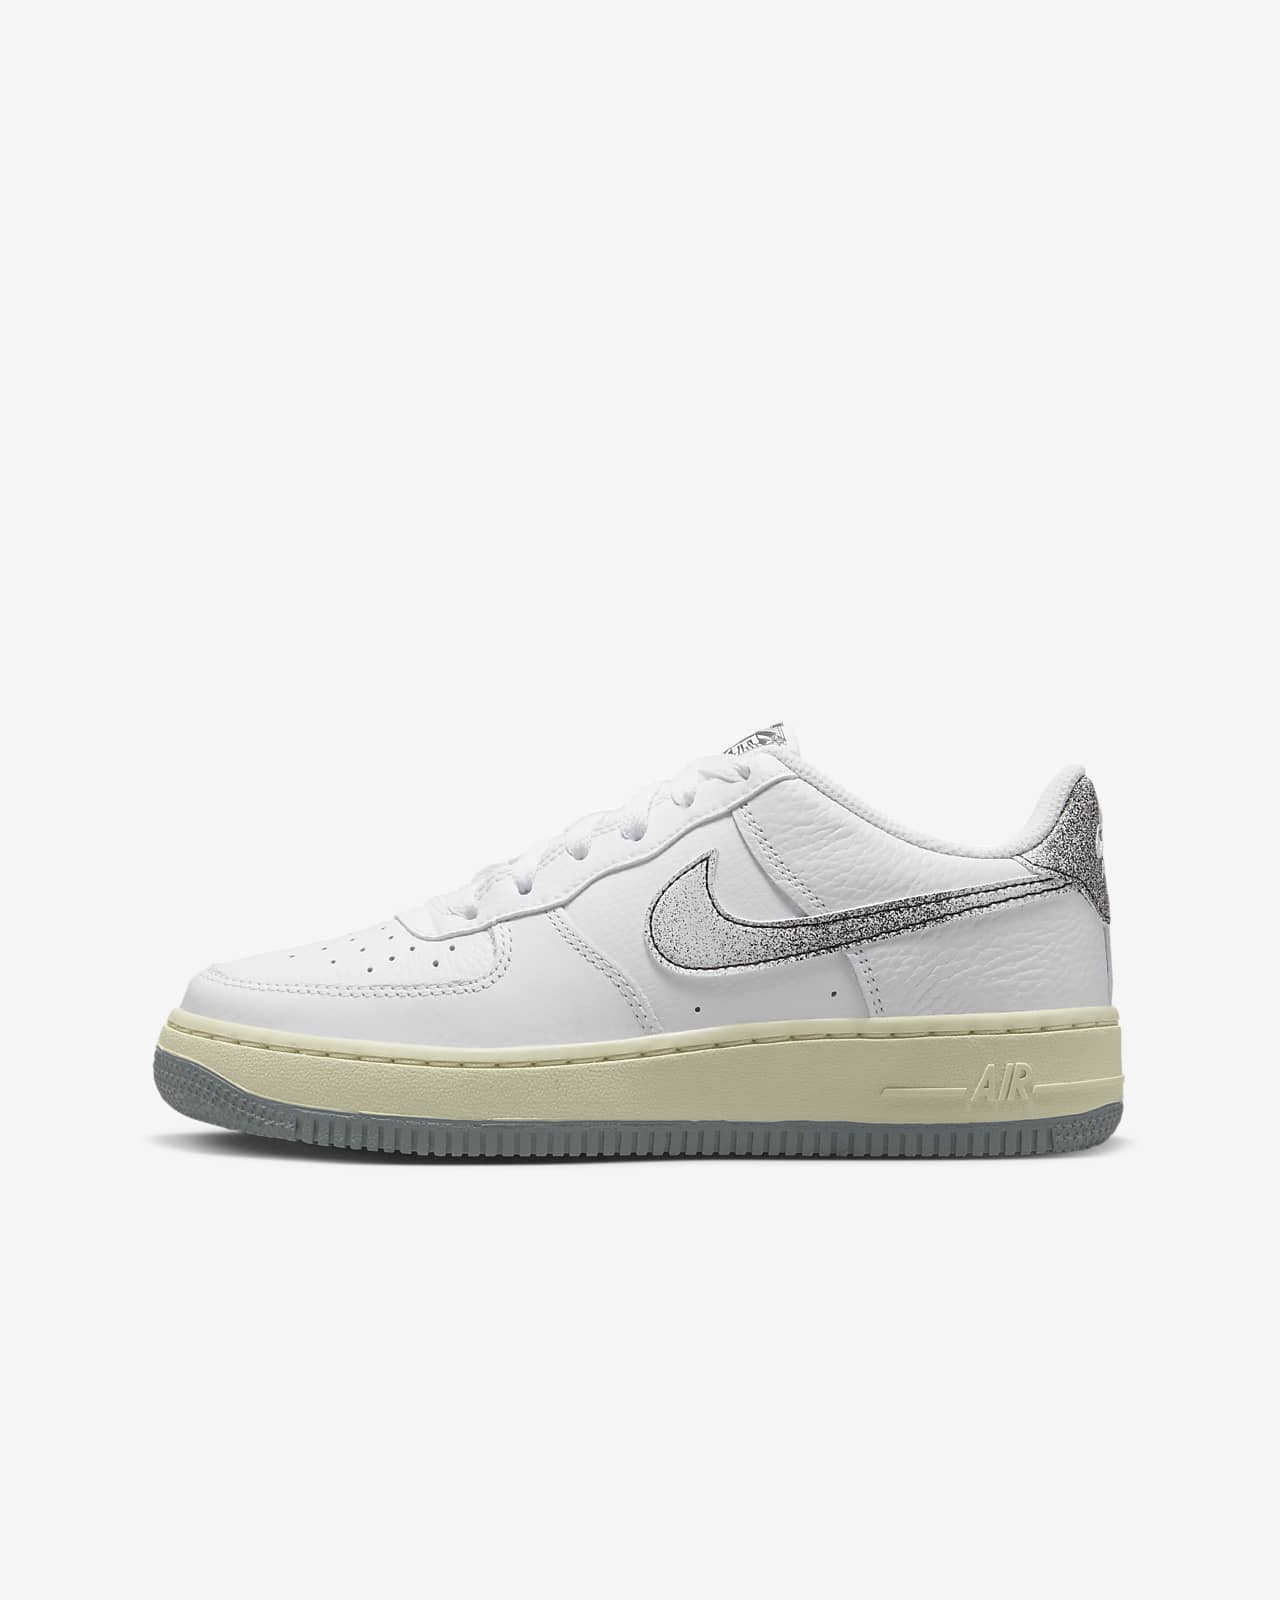 Grey Air Force 1 Shoes. Nike CA